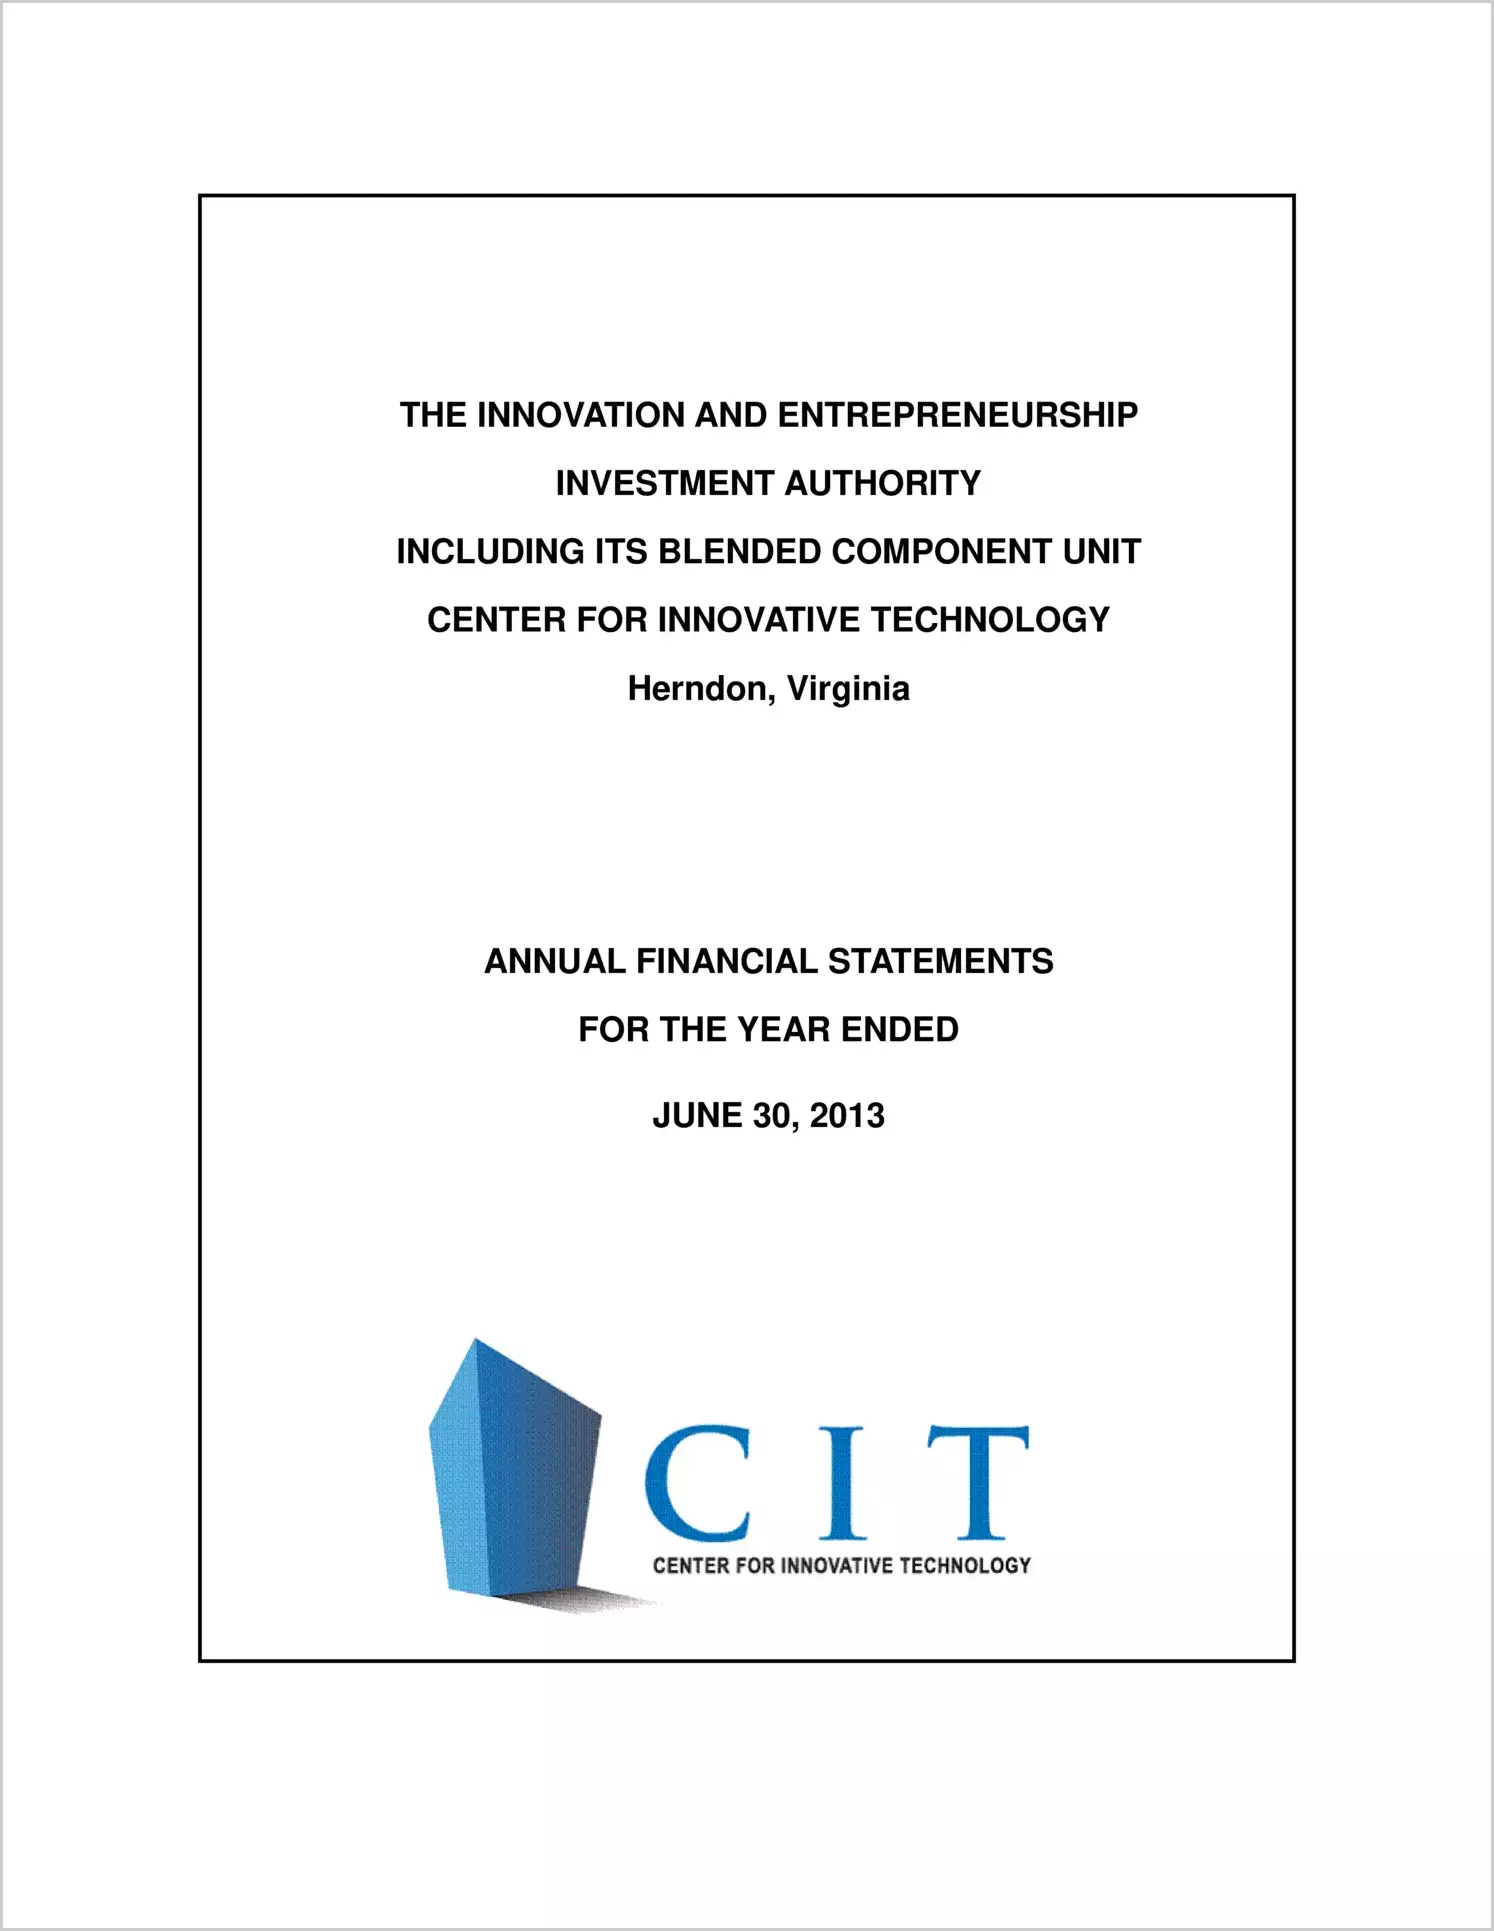 Innovation and Entrepreneurship Investment Authority Including Its Blended Component Unit Center for Innovative Technology Financial Statement Report for the year ended June 30, 2013